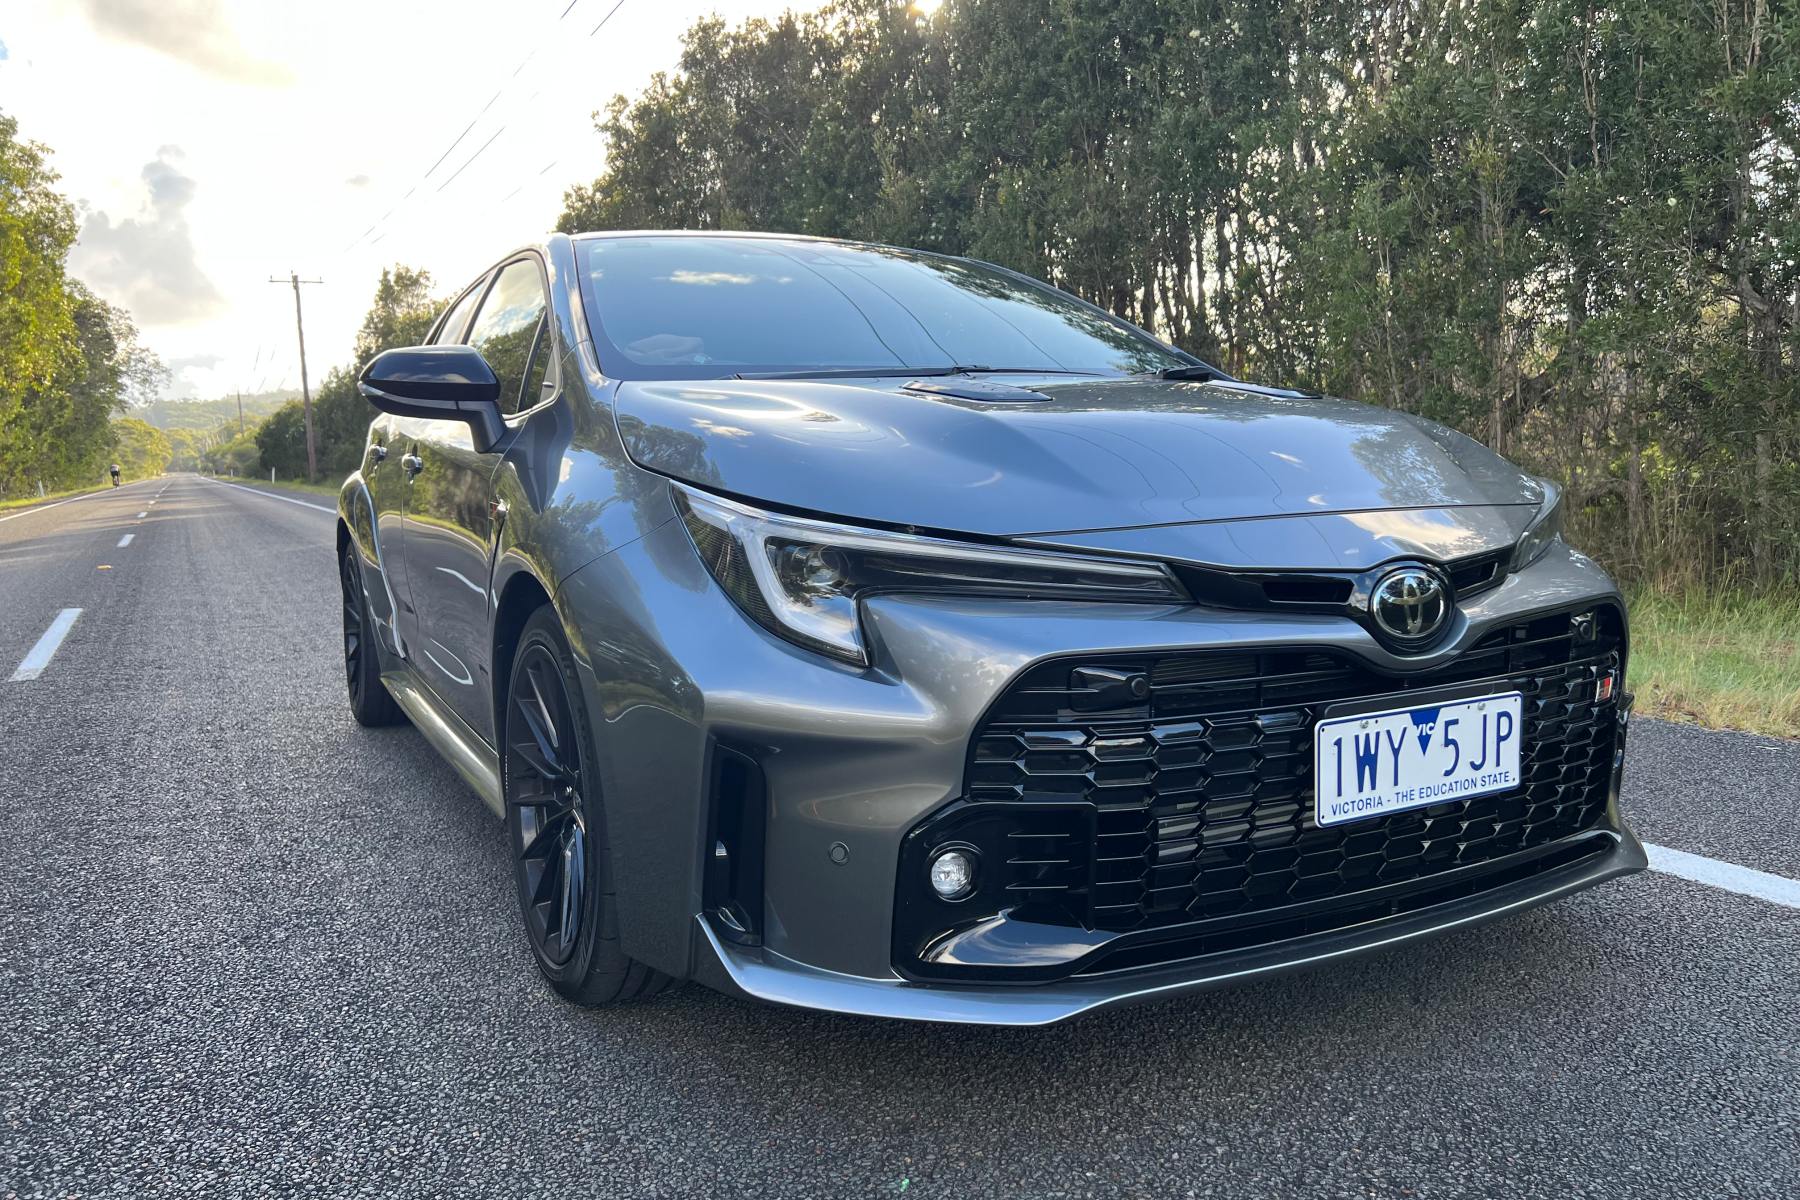 Road Test Figures: Toyota GR Corolla has VW's Golf R firmly in its sights!